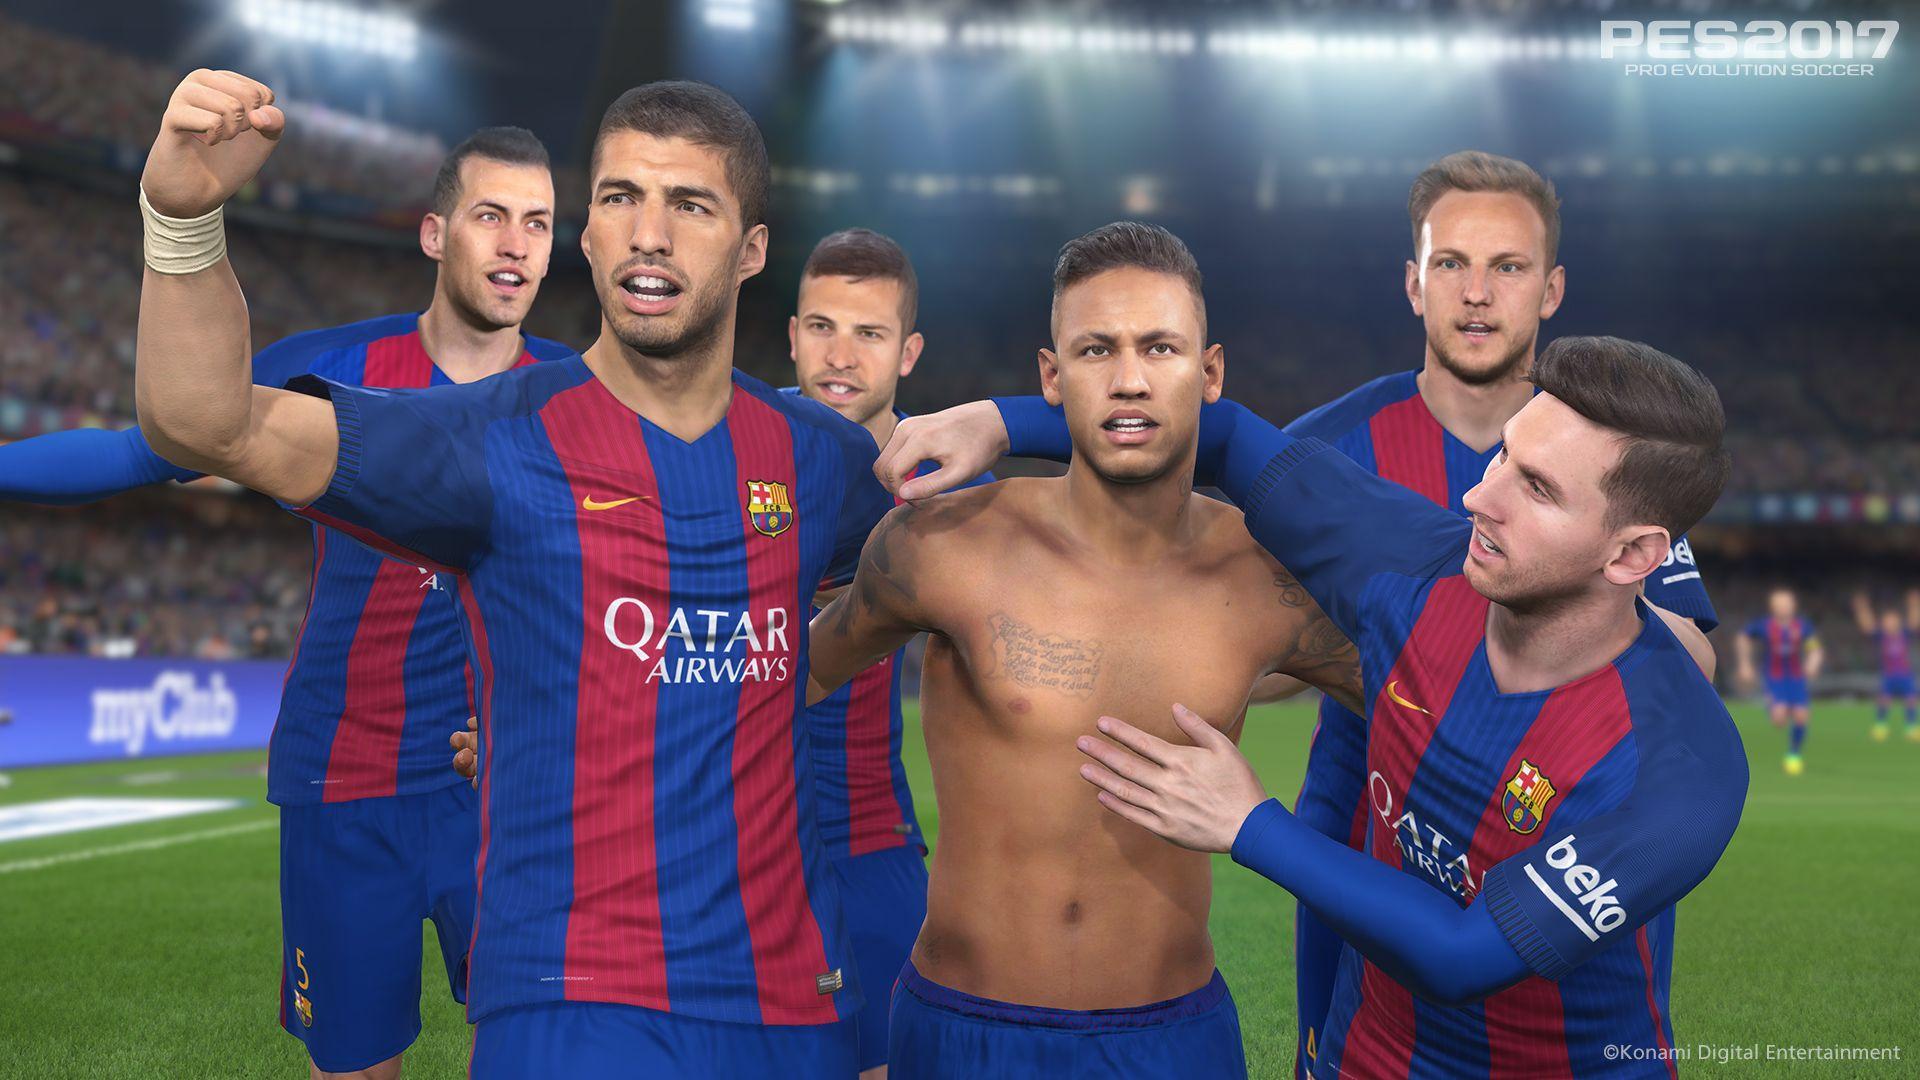 Camp Nou exclusivity and Barcelona cover stars confirmed for PES